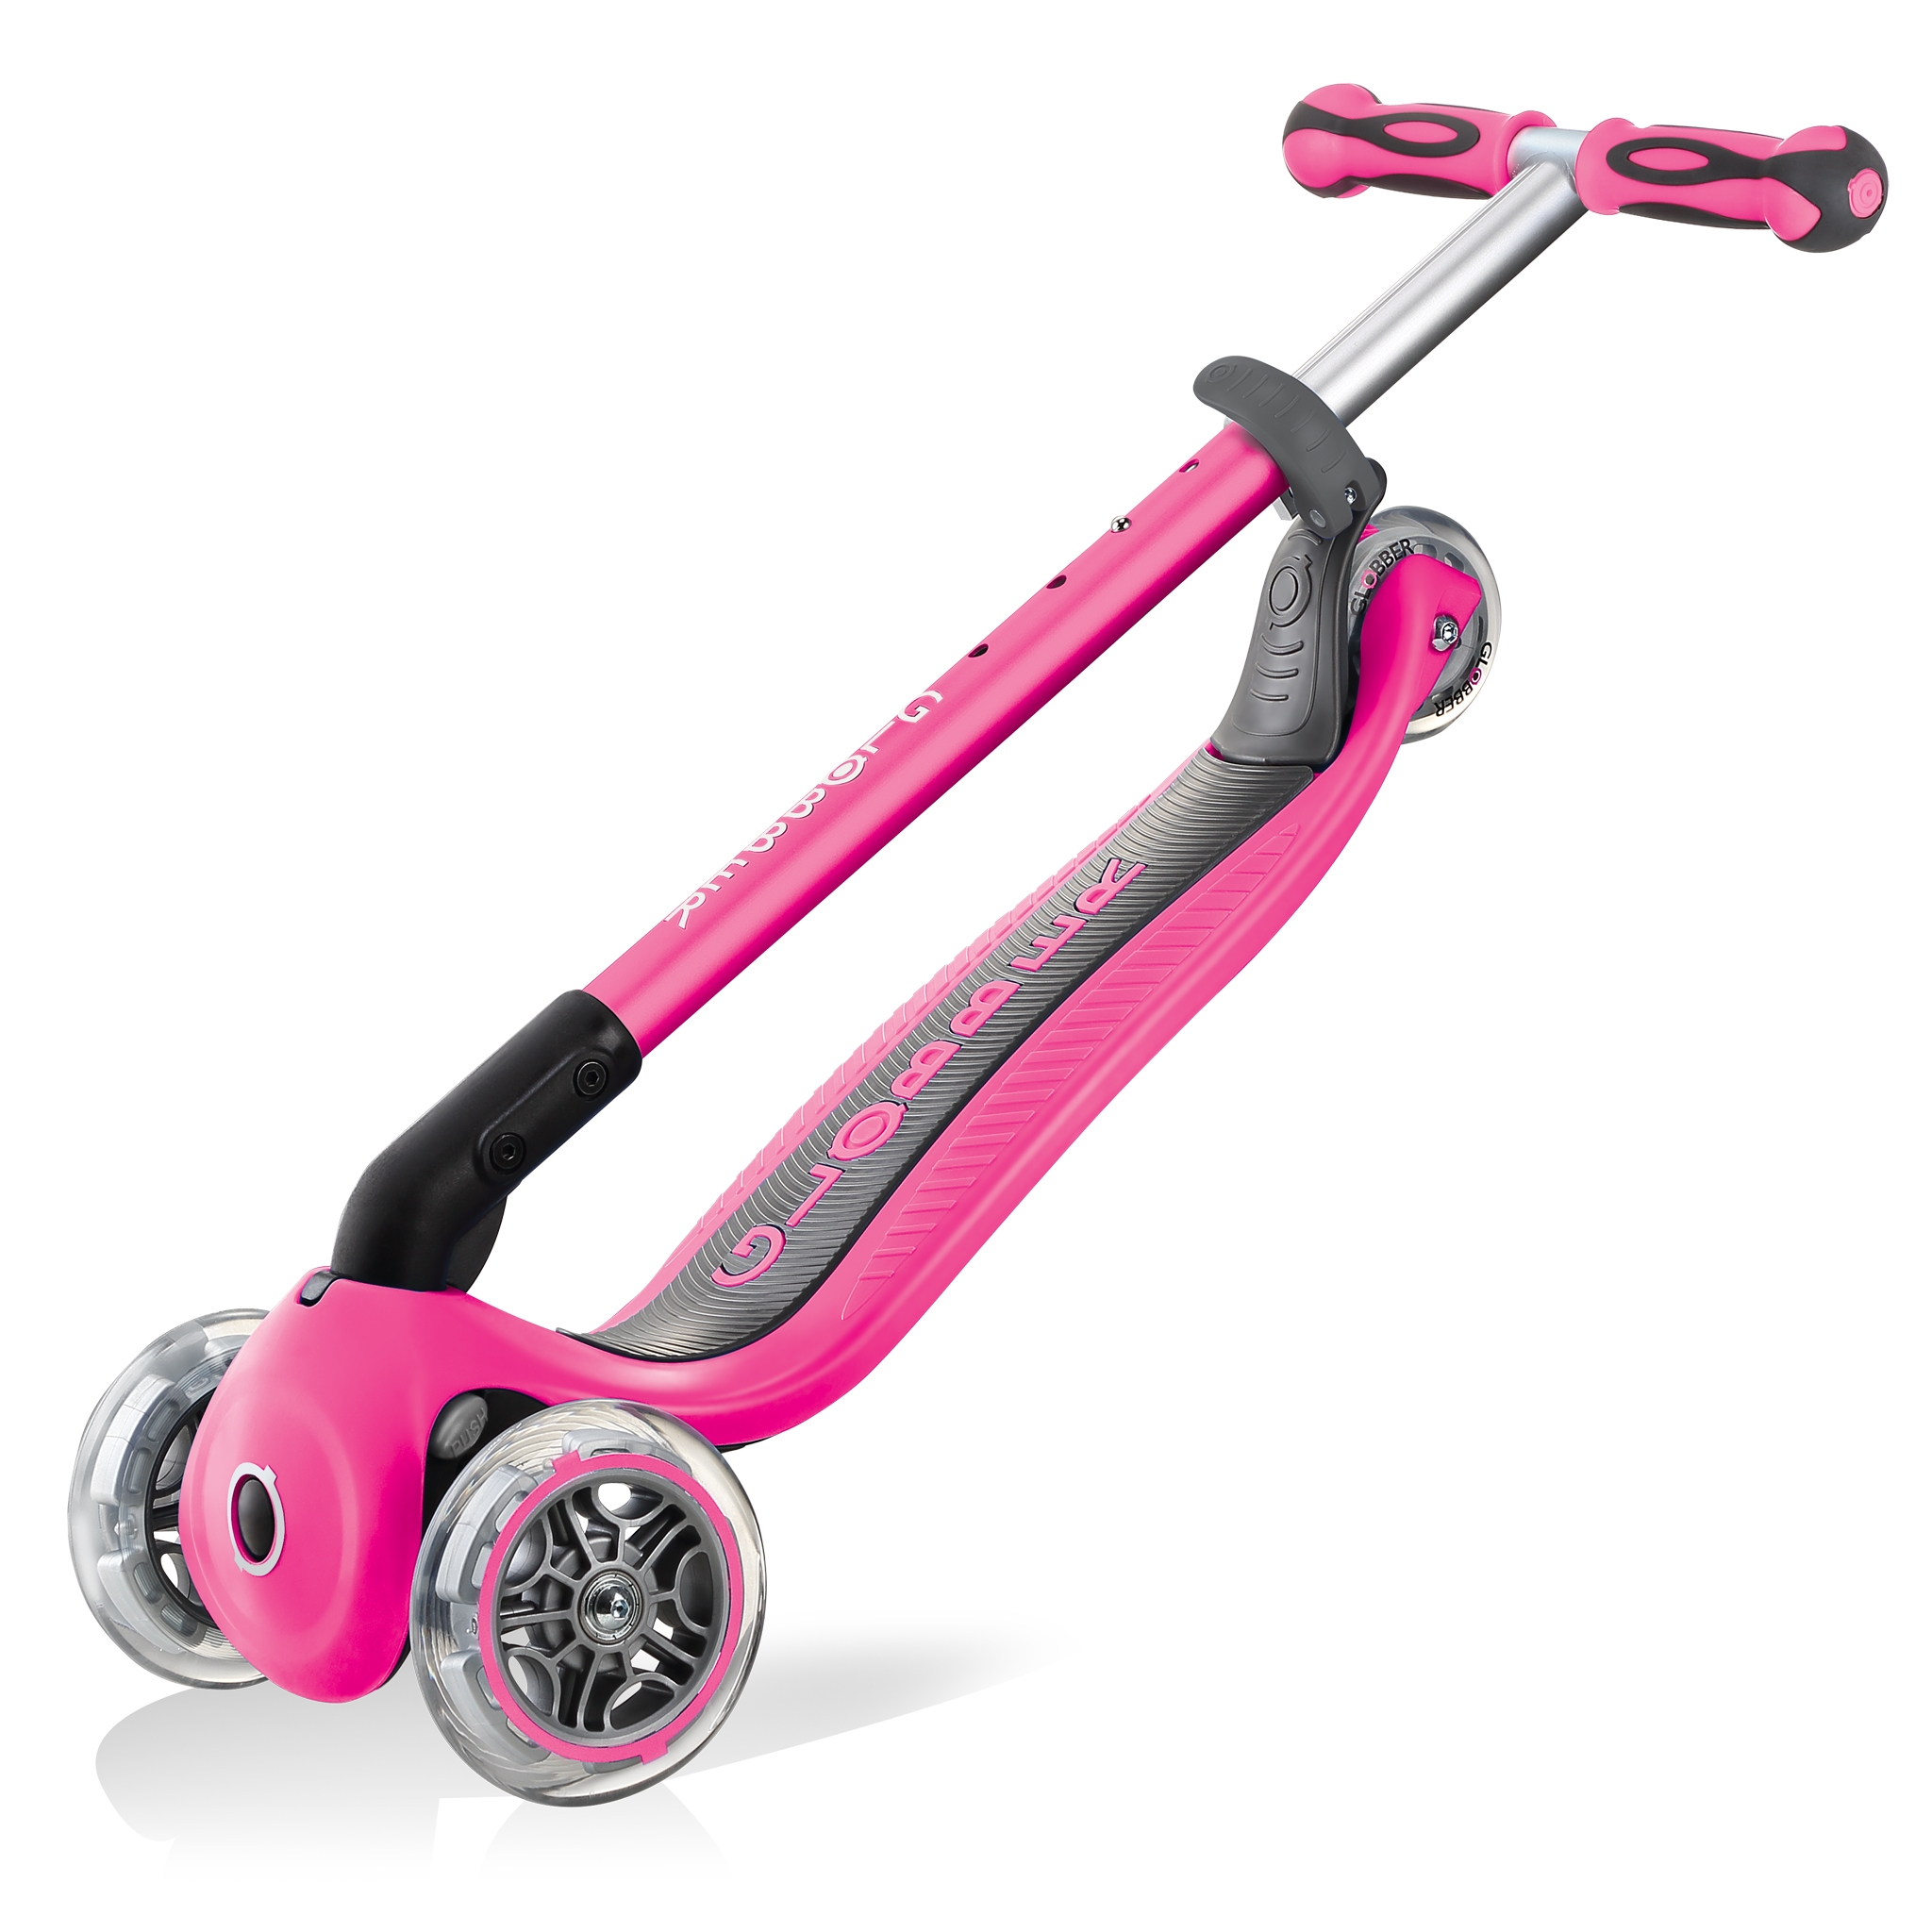 GO-UP-DELUXE-PLAY-ride-on-walking-bike-scooter-with-light-and-sound-module-trolley-mode-compatible-deep-pink 5